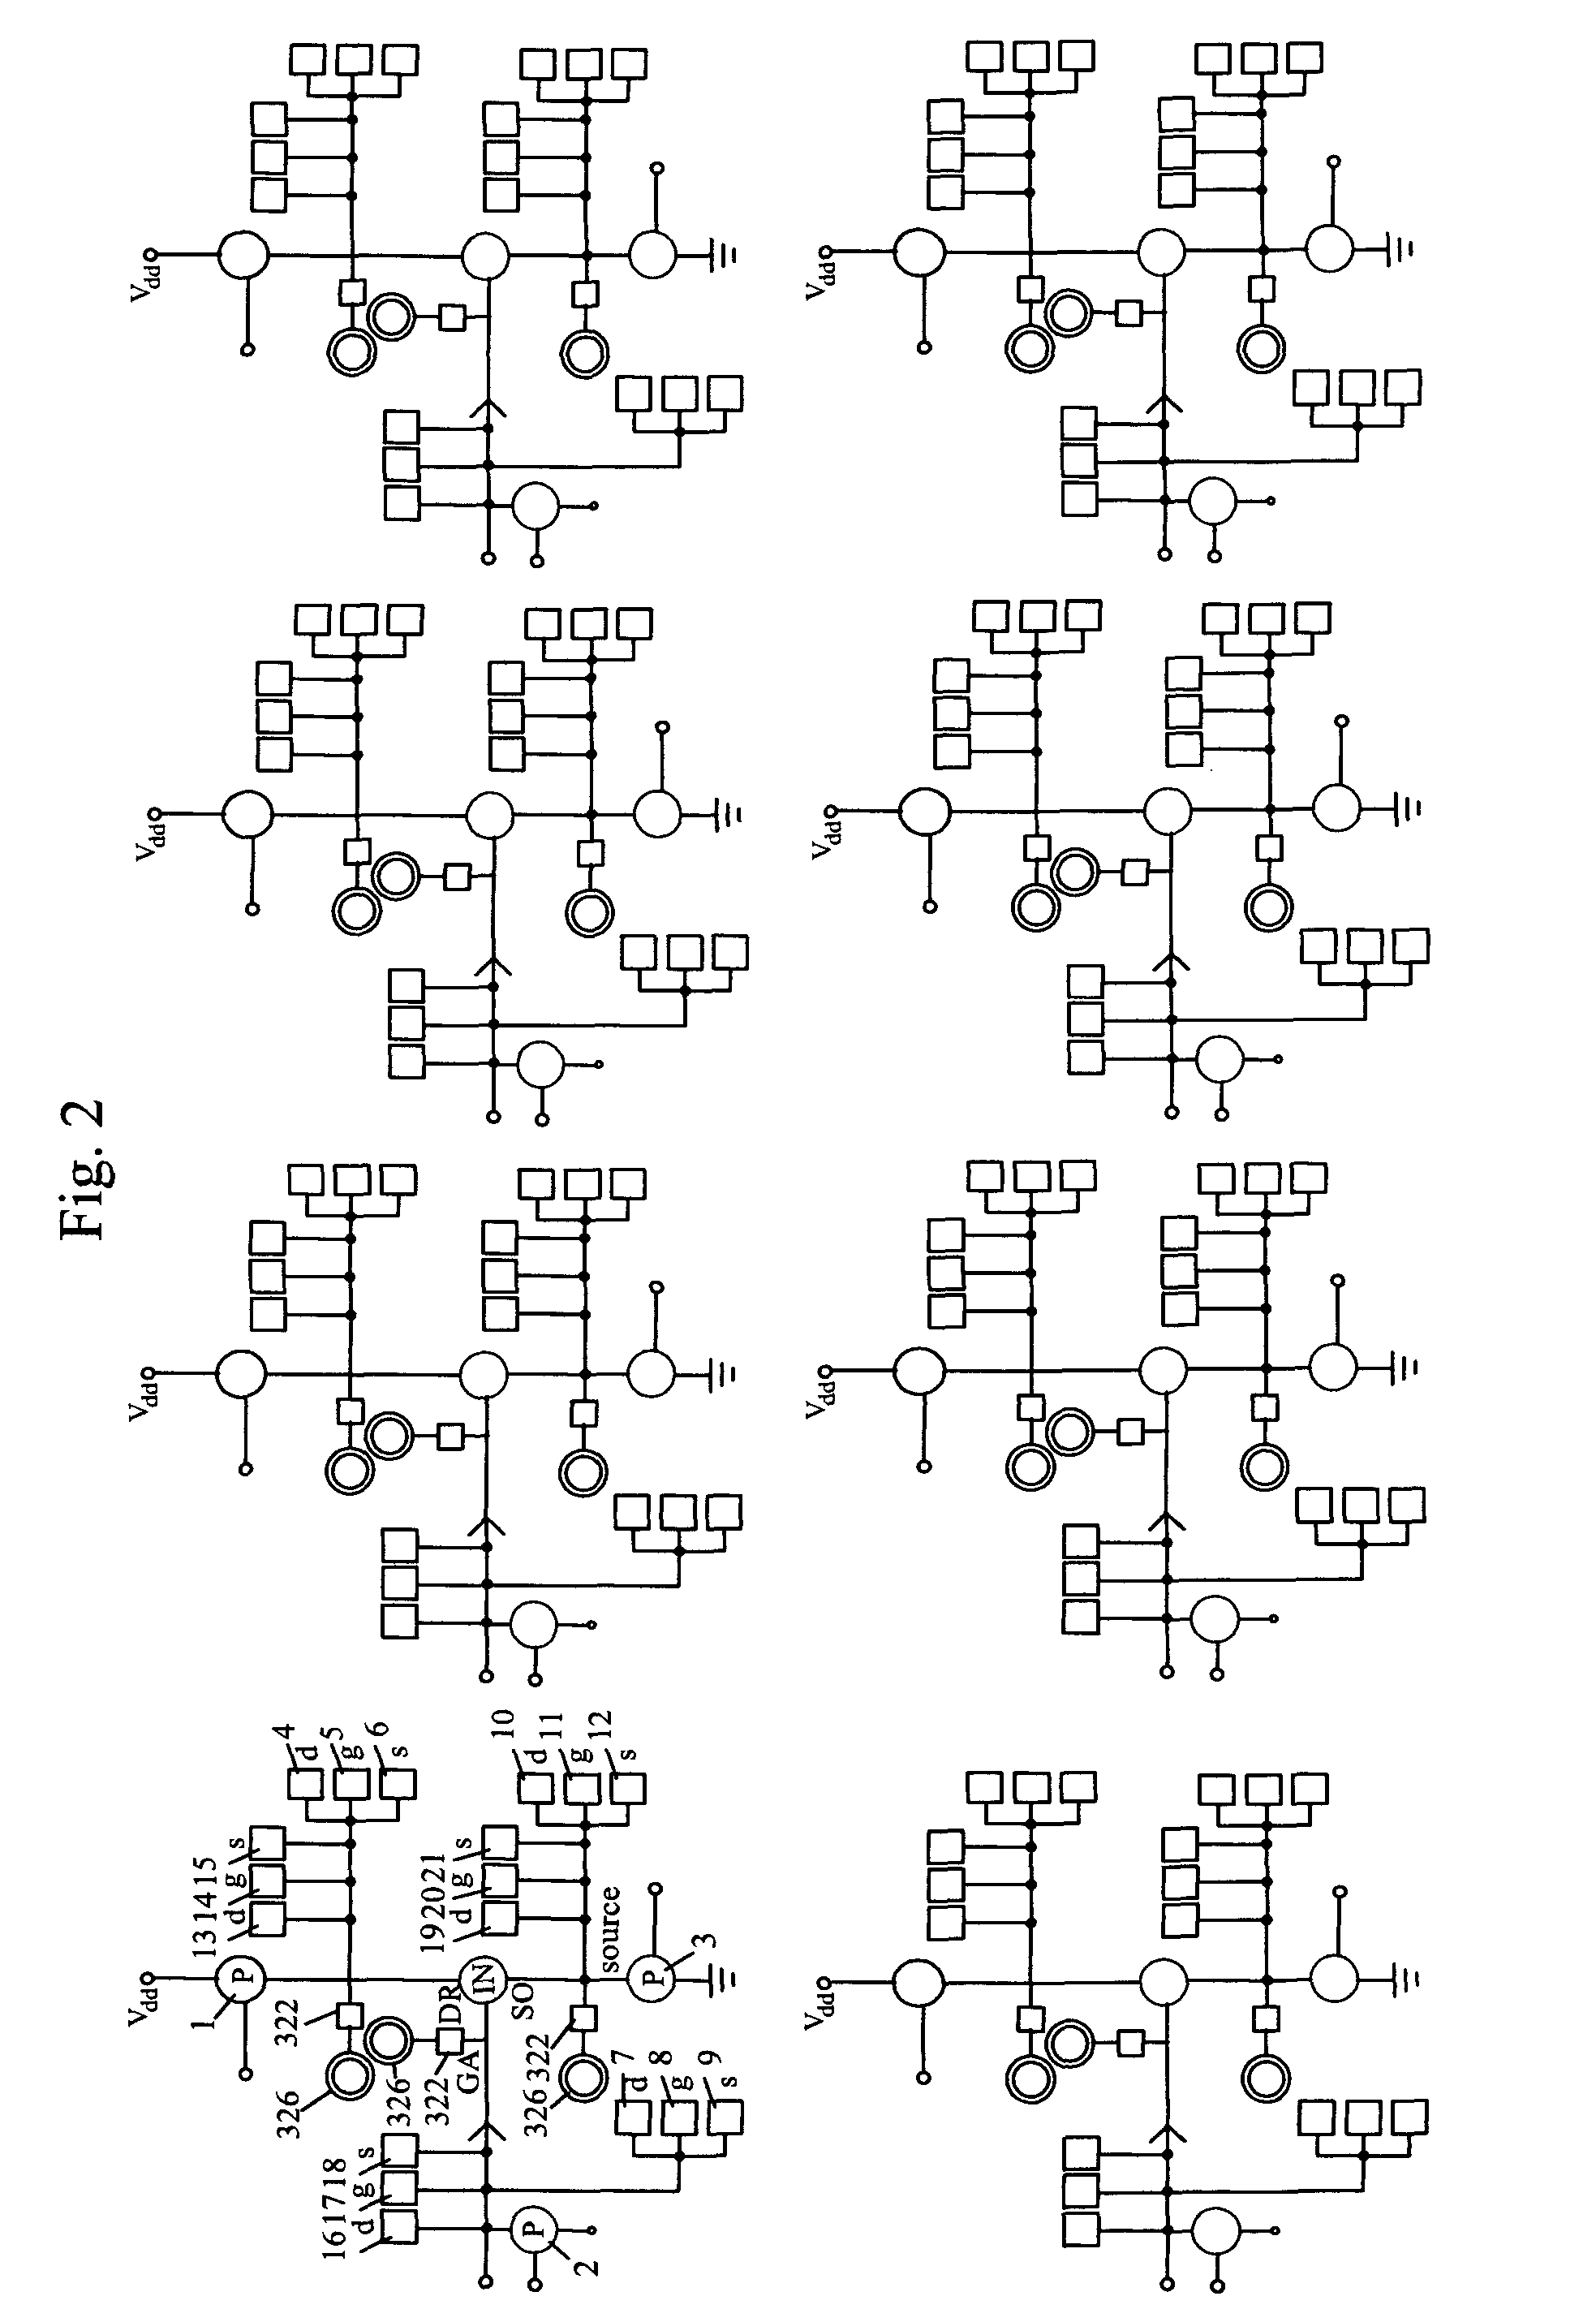 Continuous flow instant logic binary circuitry actively structured by code-generated pass transistor interconnects